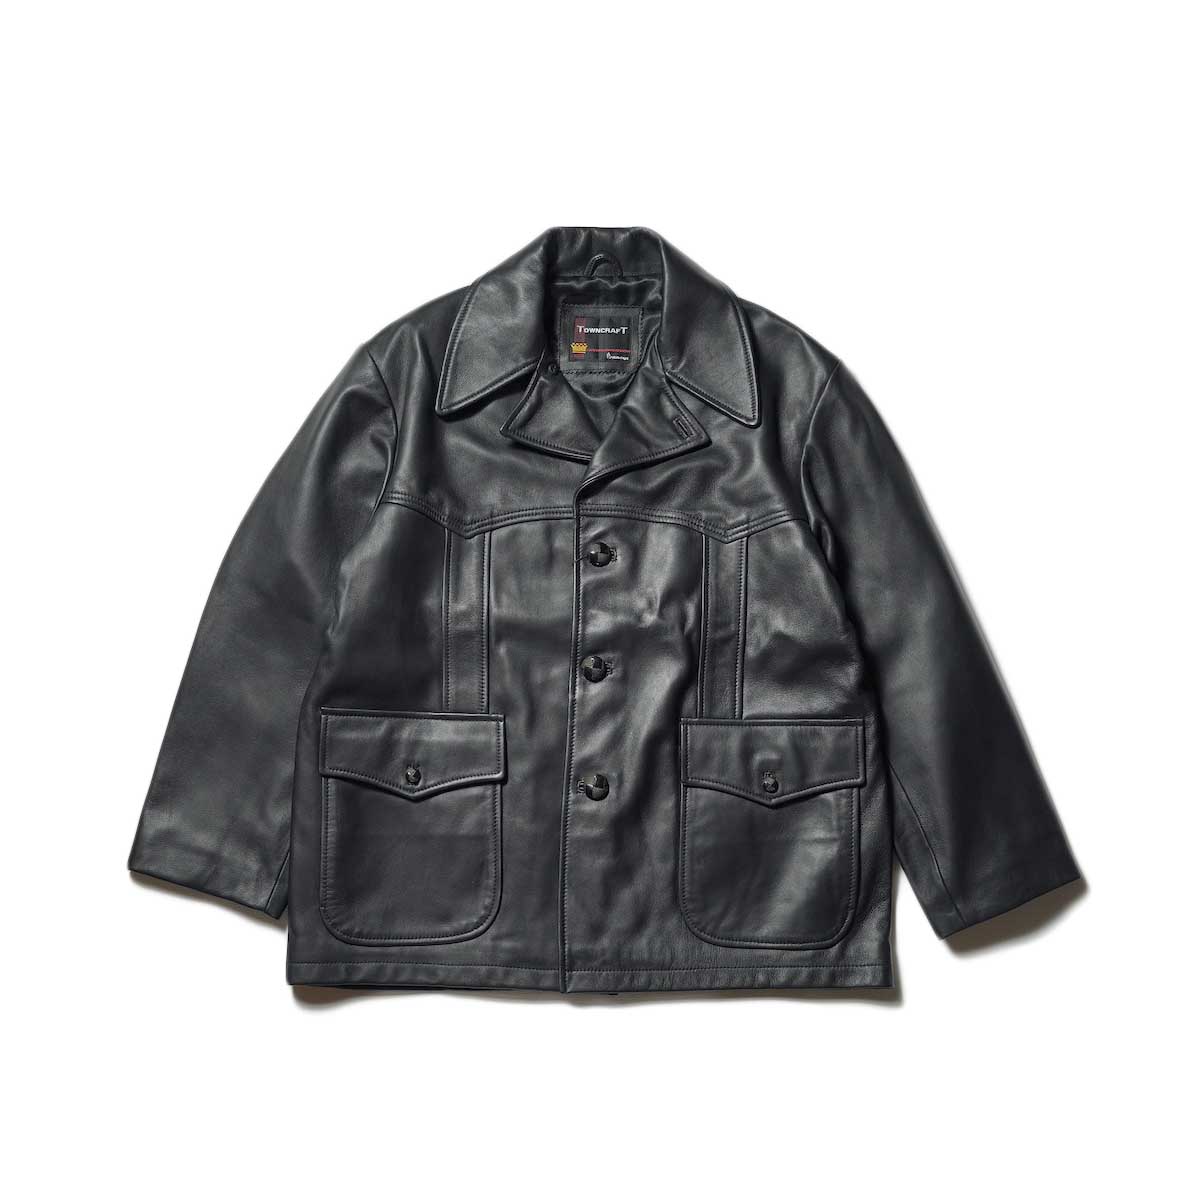 TOWNCRAFT / LEATHER RANCH COAT (Black)